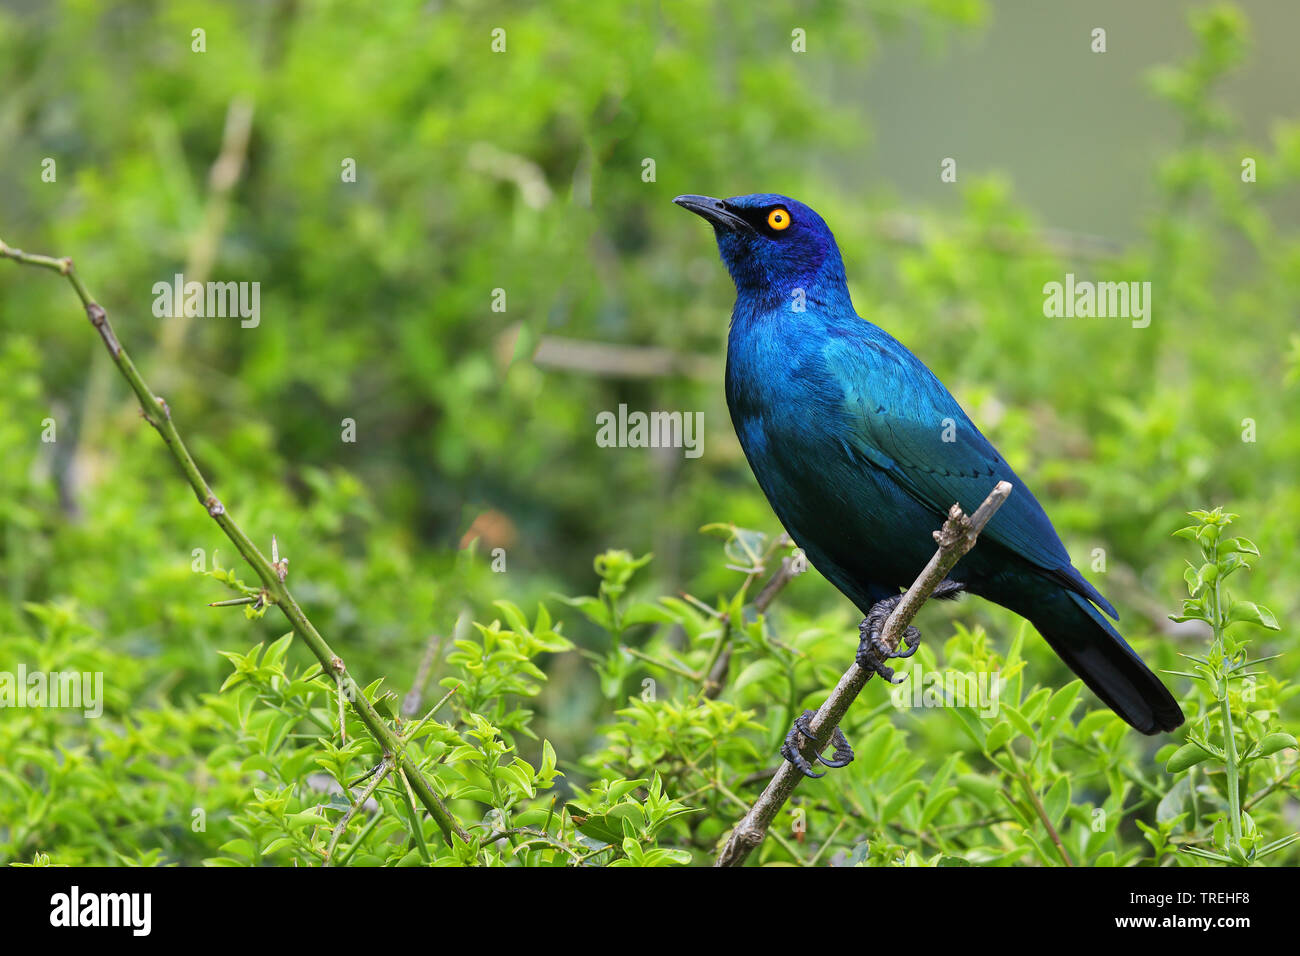 red-shouldered glossy starling (Lamprotornis nitens), sitting on a bush, South Africa, Eastern Cape, Addo Elephant National Park Stock Photo